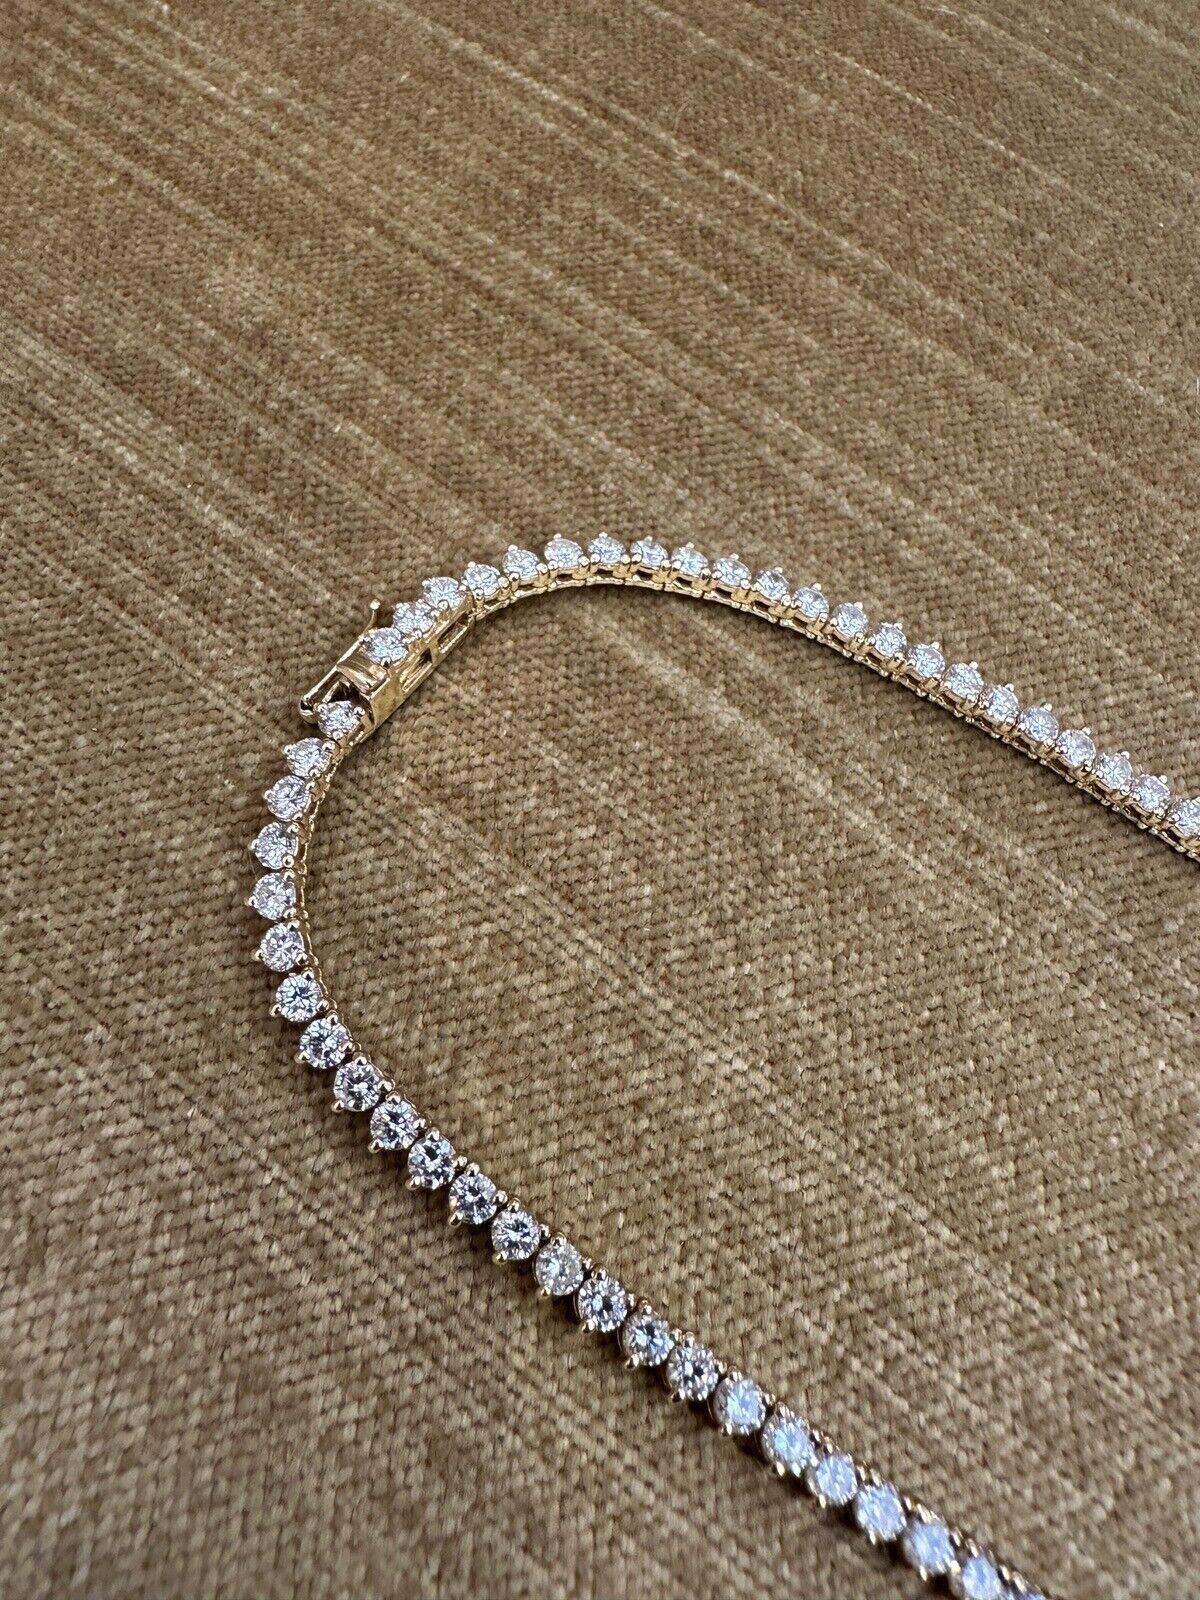 Diamond Tennis Necklace 11.64 Carats Total Weight Graduated in 18k Yellow Gold In Excellent Condition For Sale In La Jolla, CA